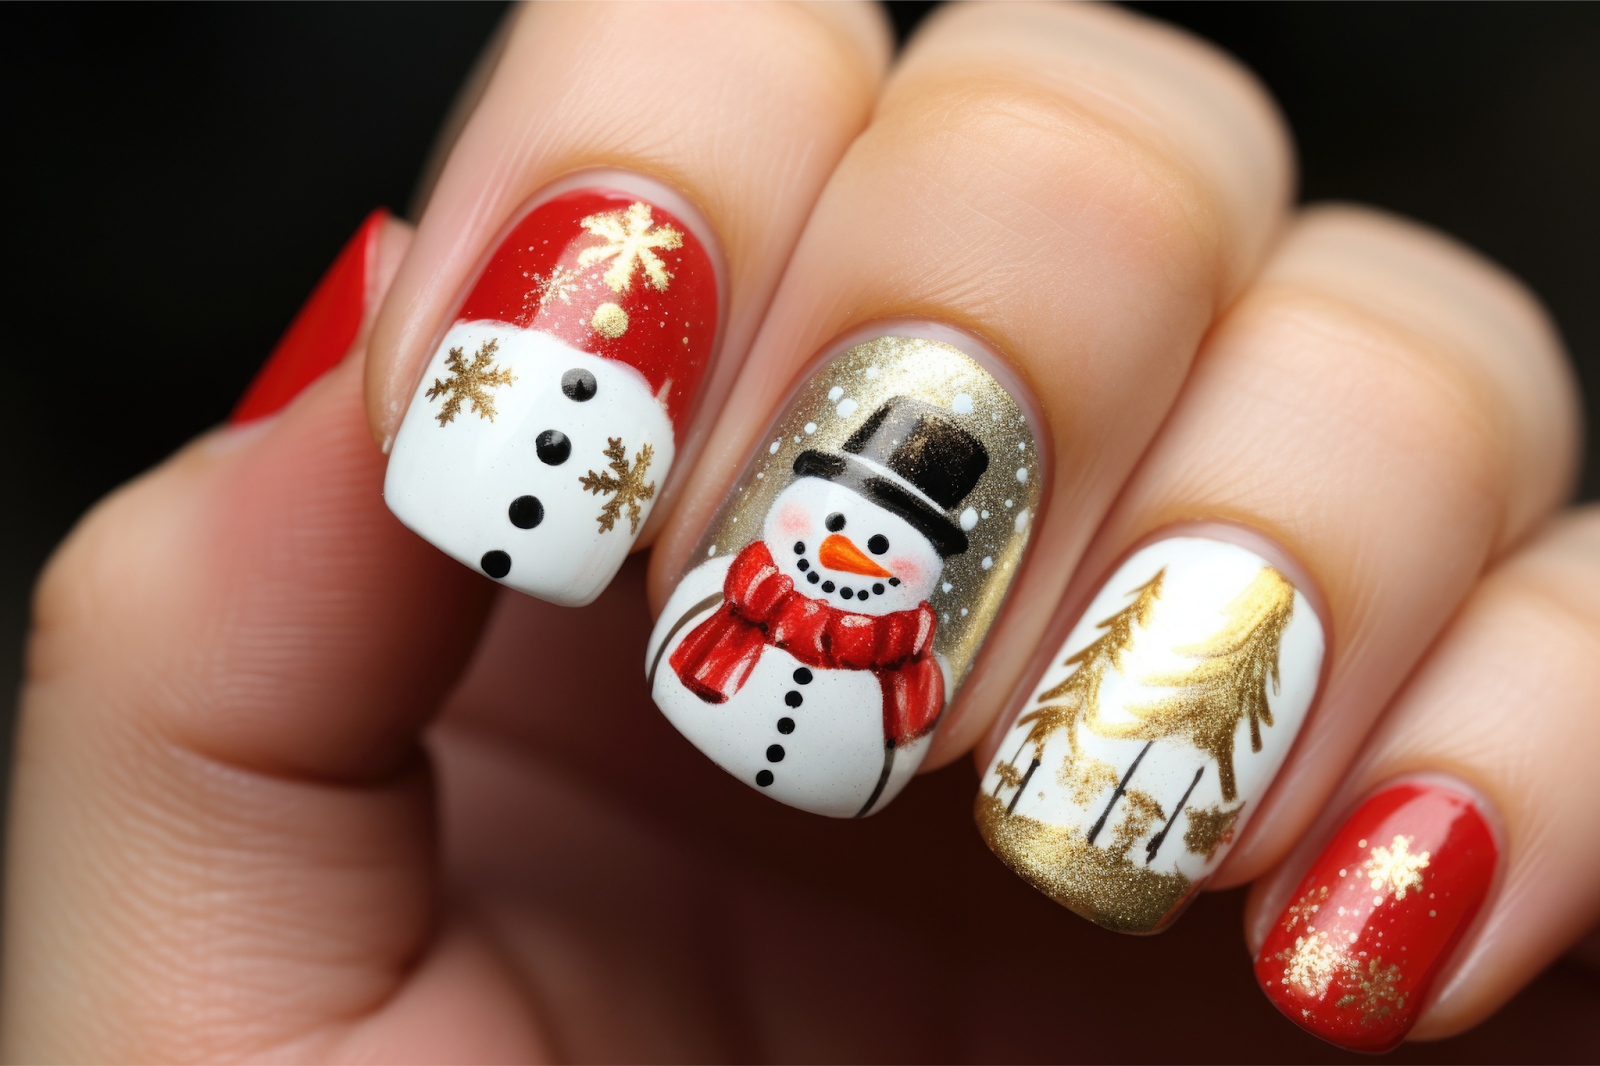 Nails designed with various Christmas creations.